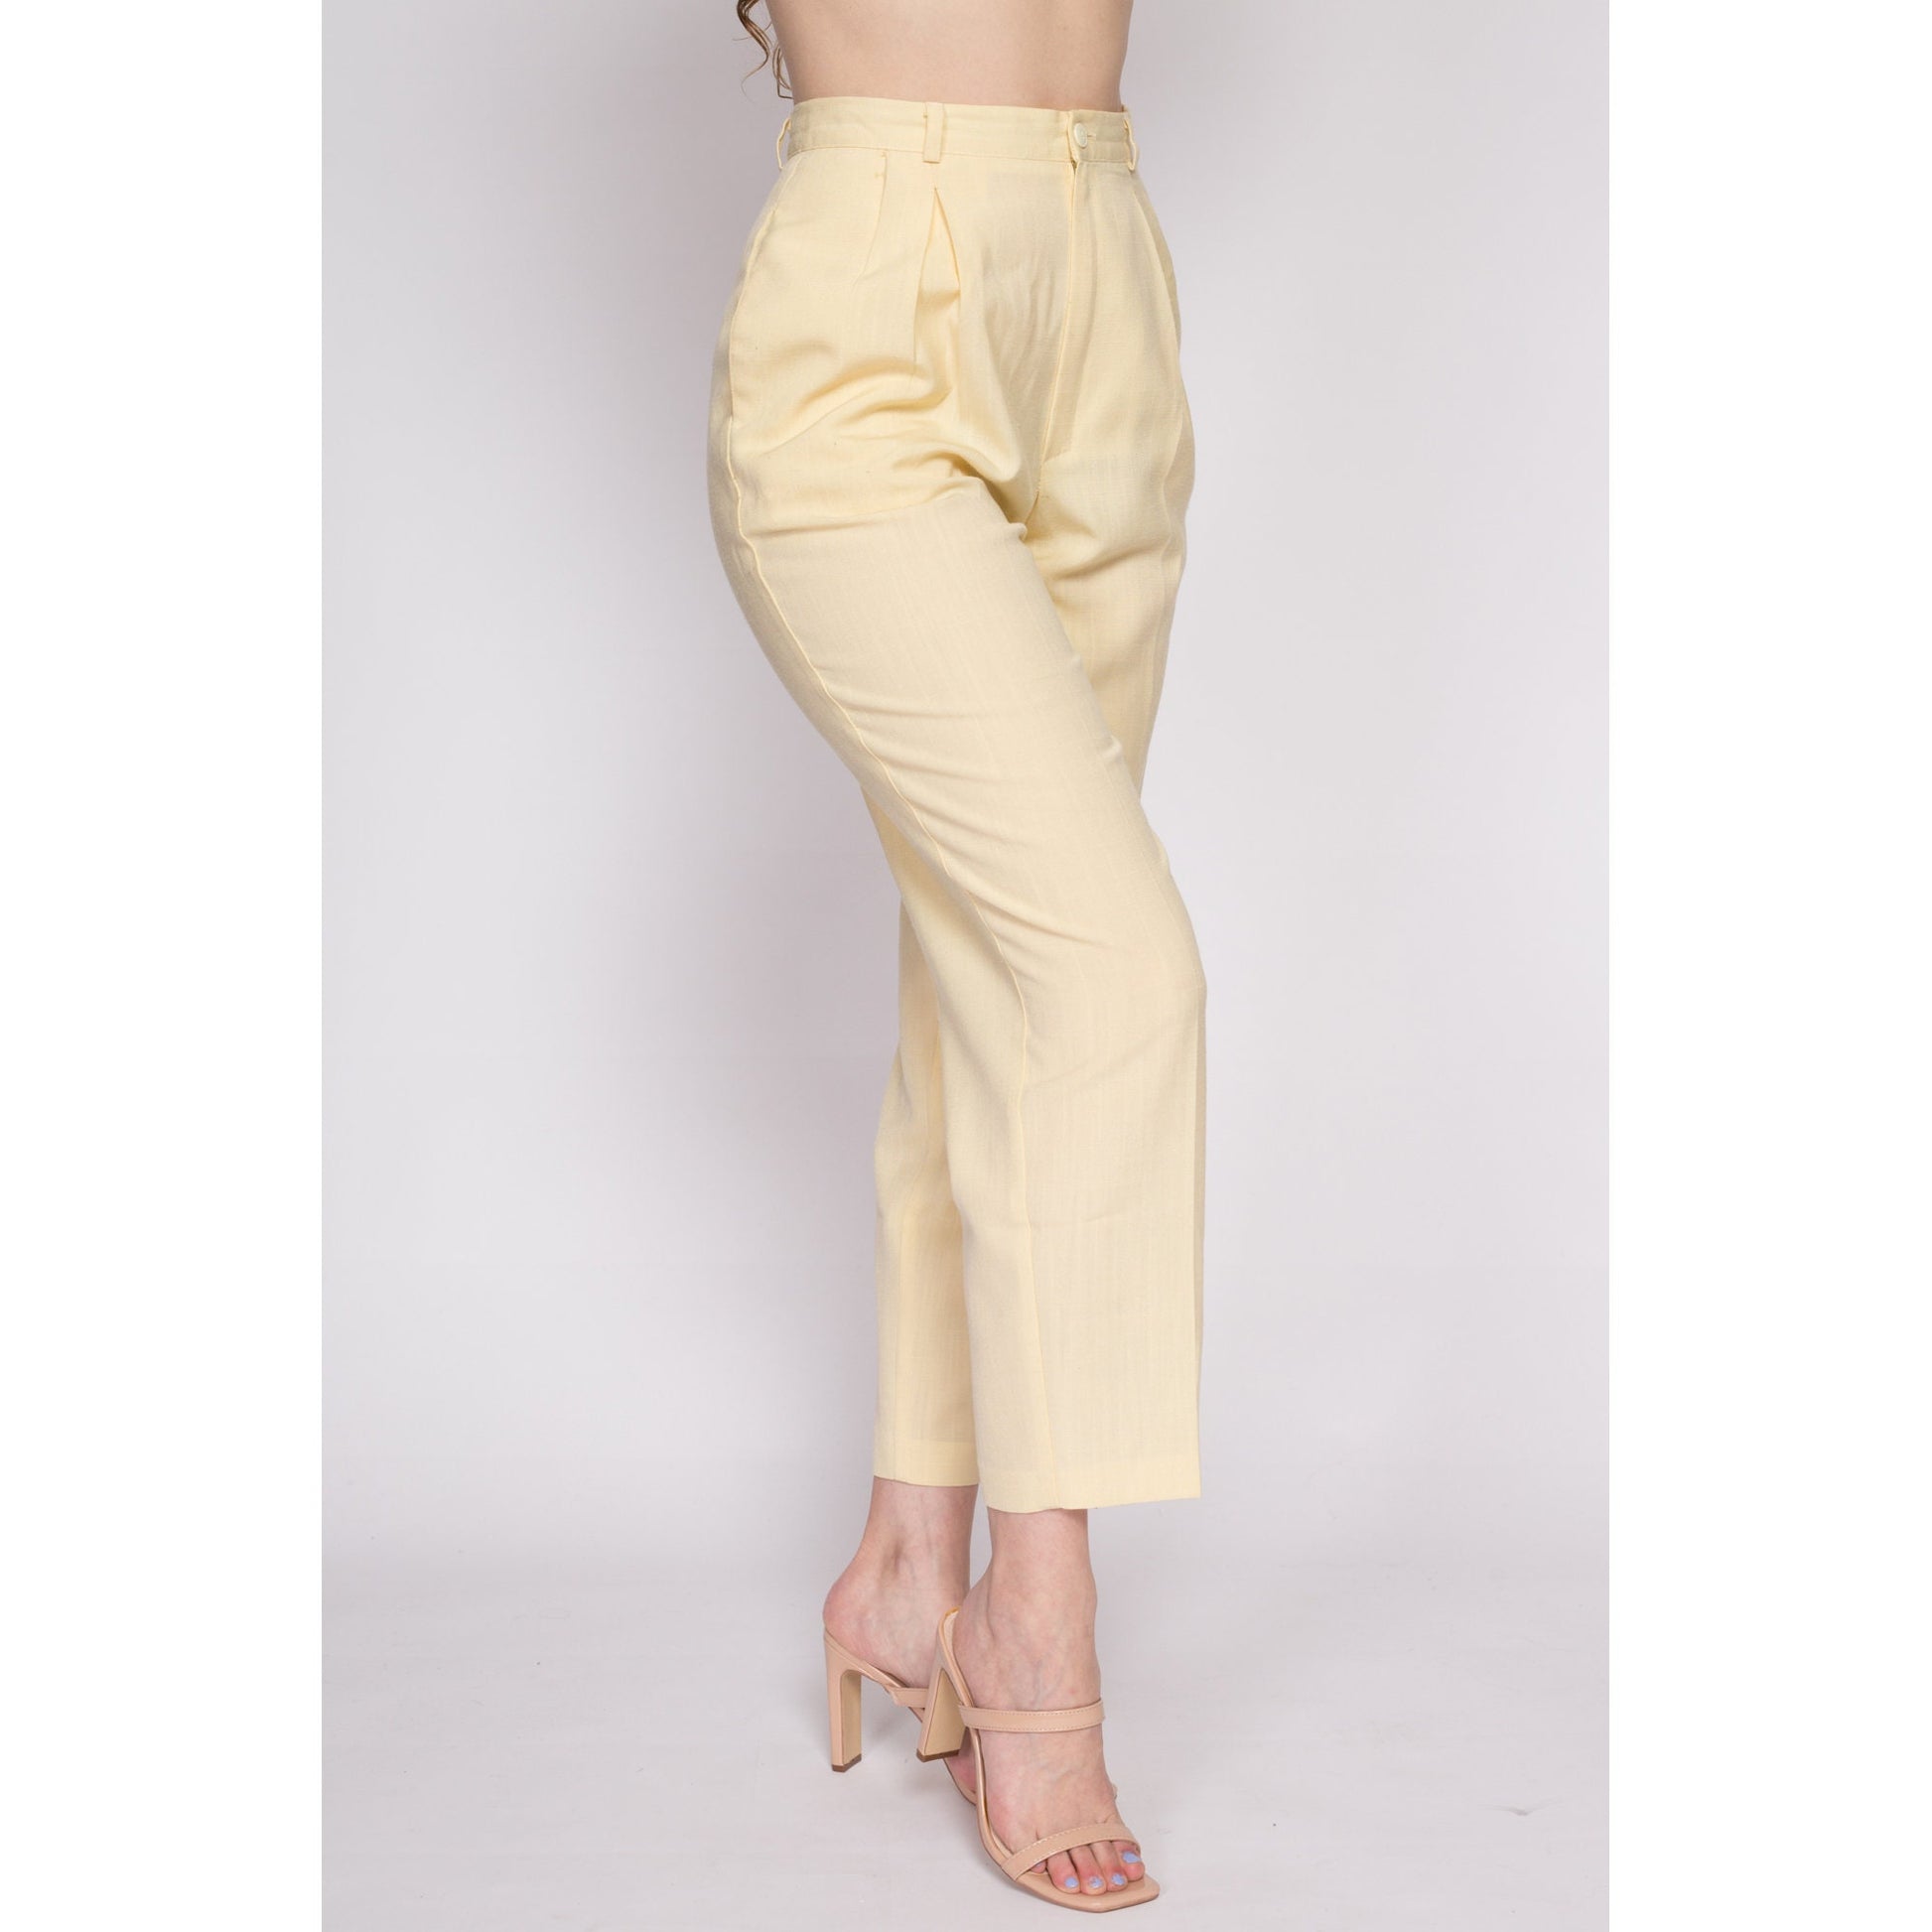 80s Butter Yellow High Waisted Trousers - Medium, 27.5 – Flying